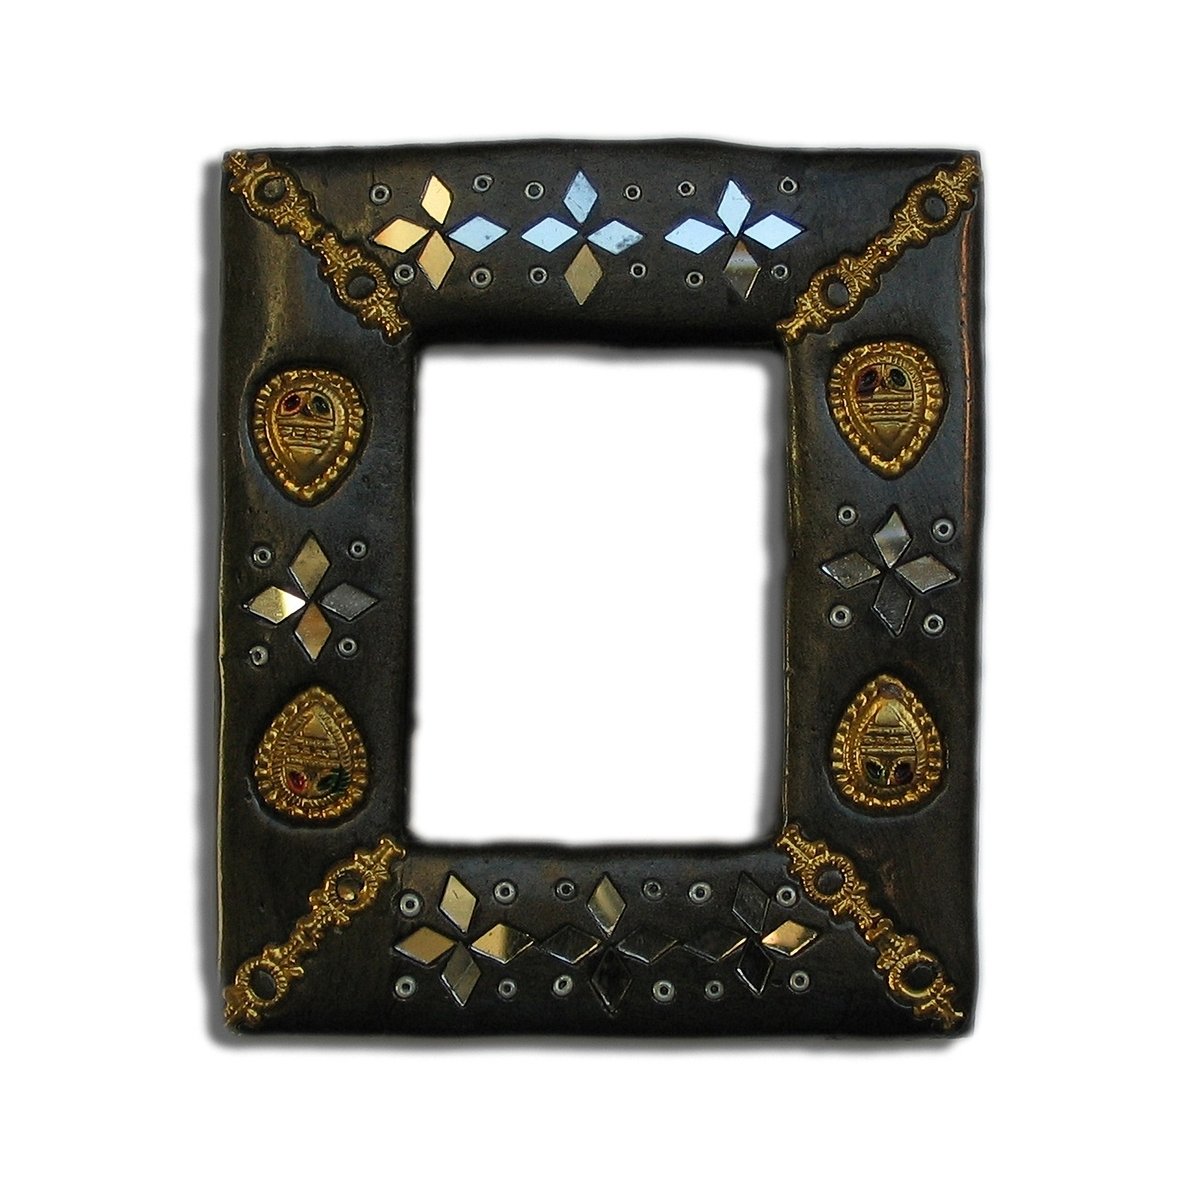 a small black frame decorated with jewels and gold